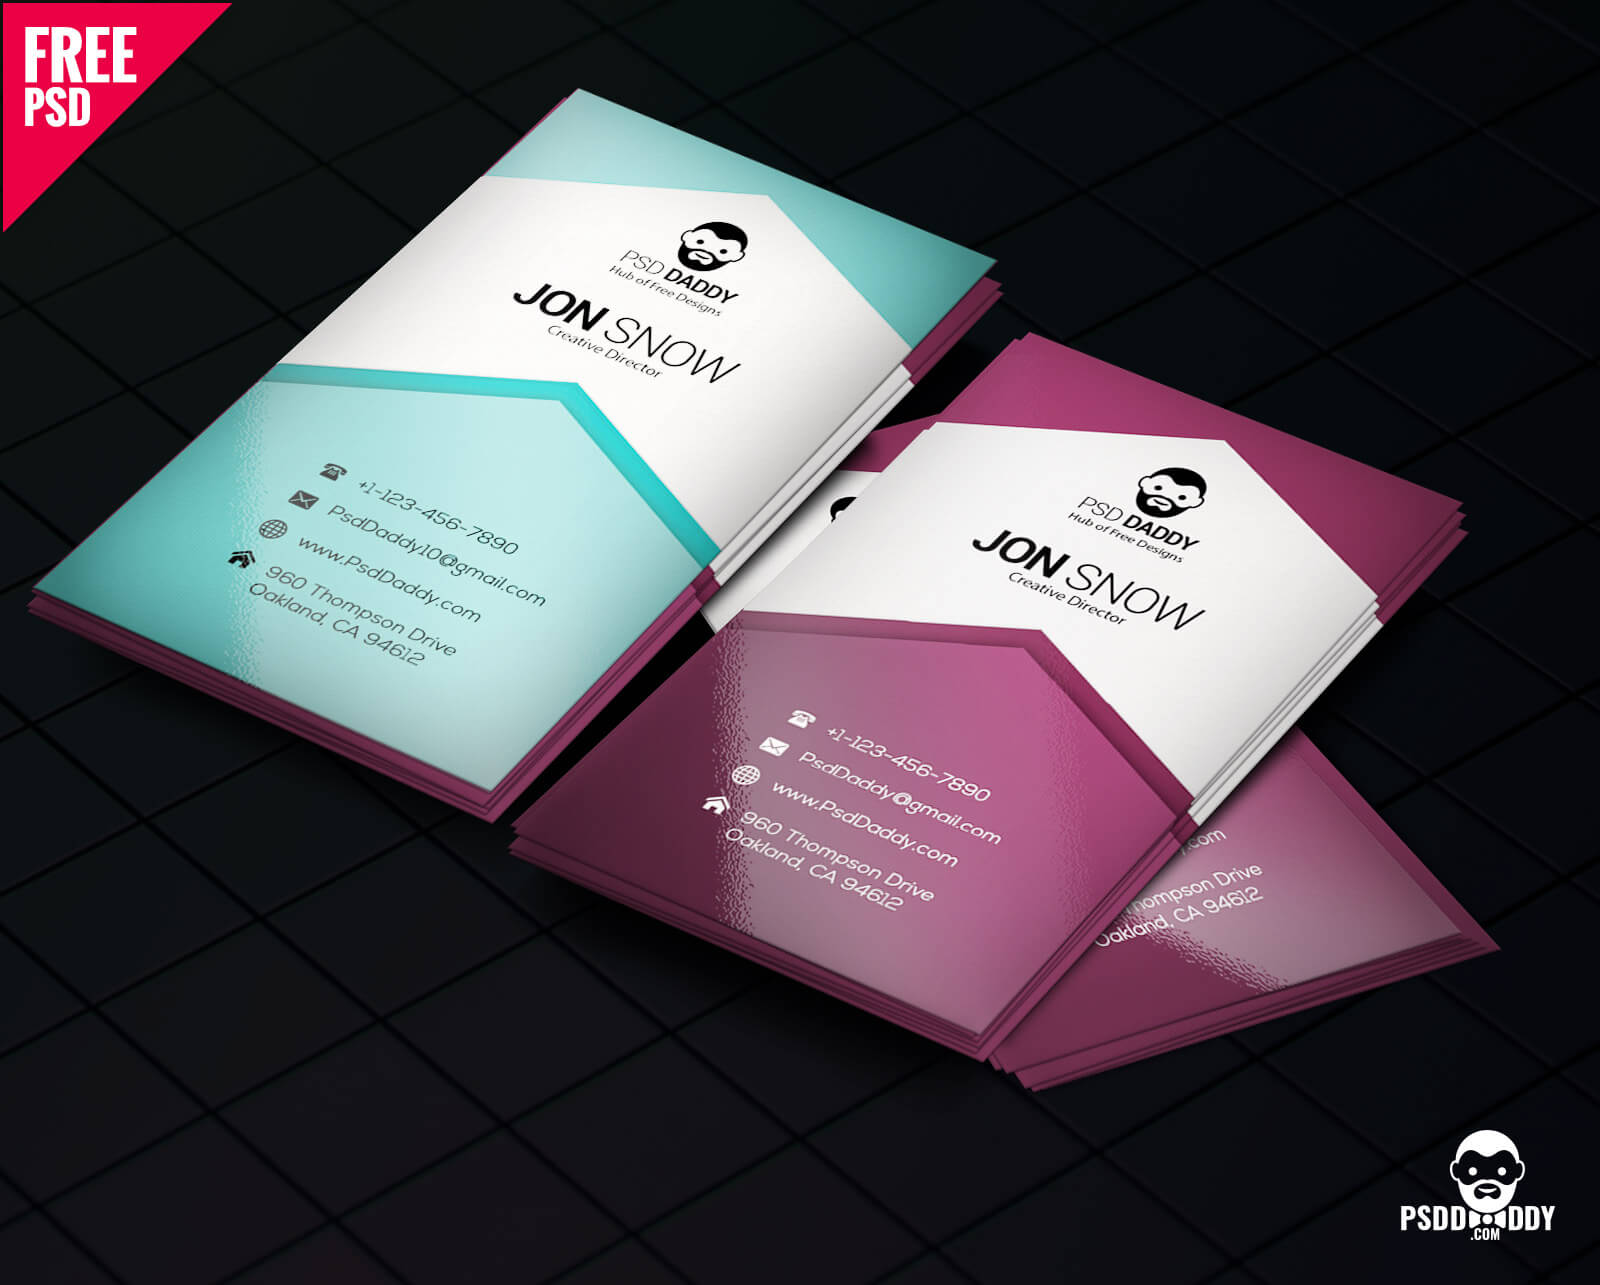 Download]Creative Business Card Psd Free | Psddaddy Pertaining To Business Card Maker Template